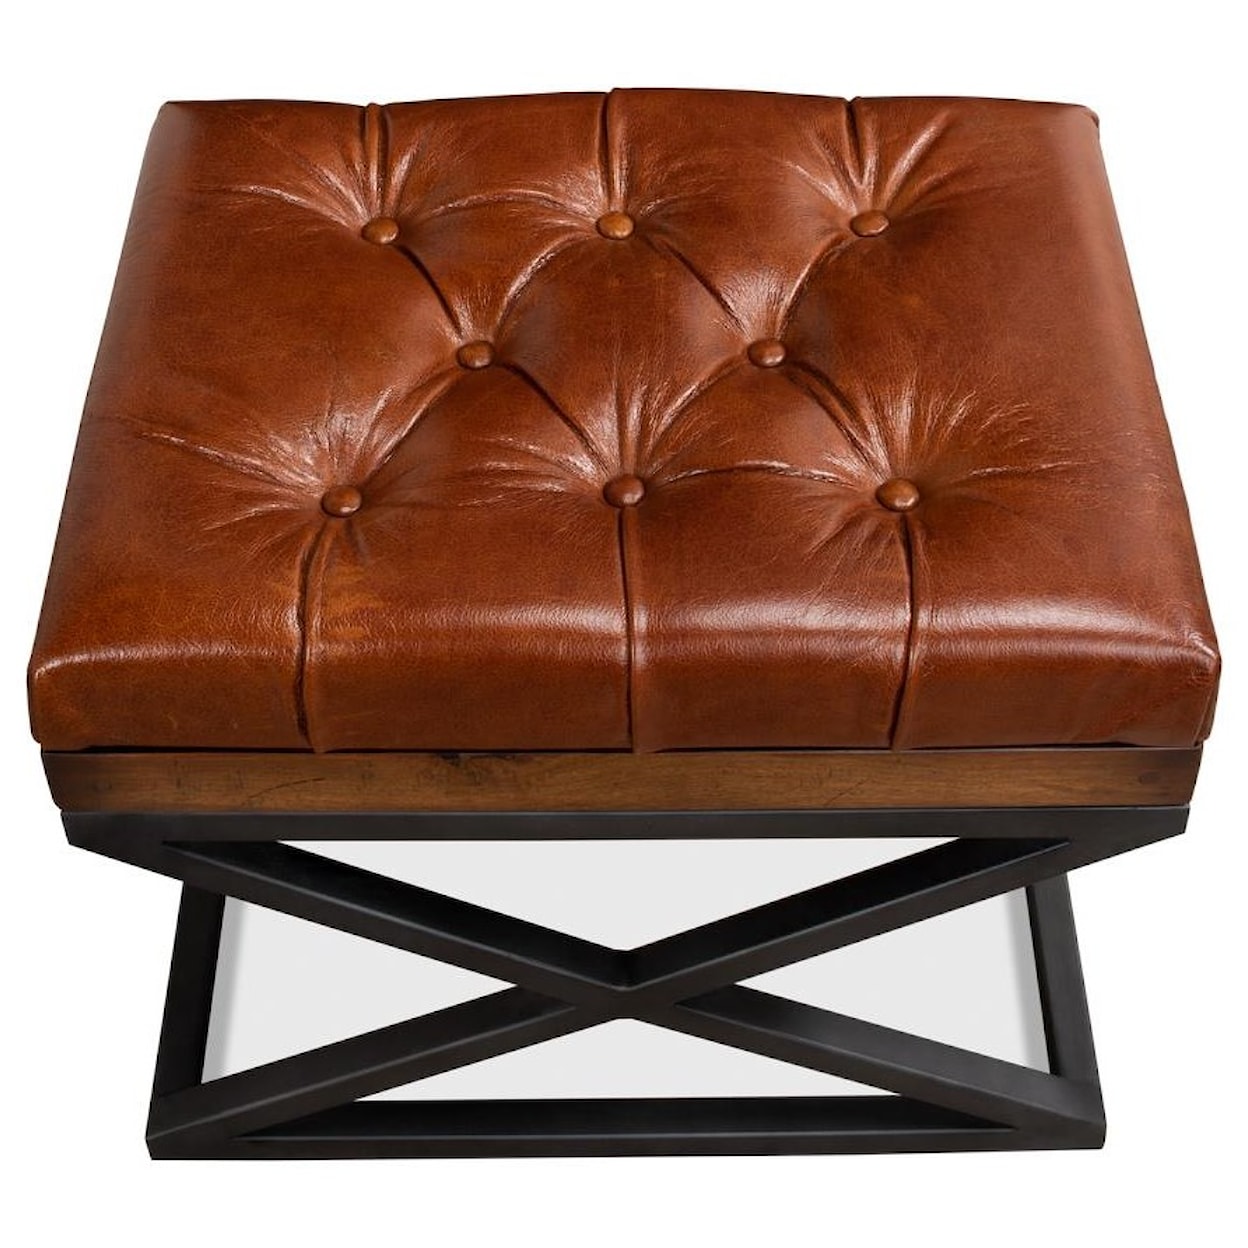 Sarreid Ltd Benches, Stools and Ottomans Leather Cushion Bench